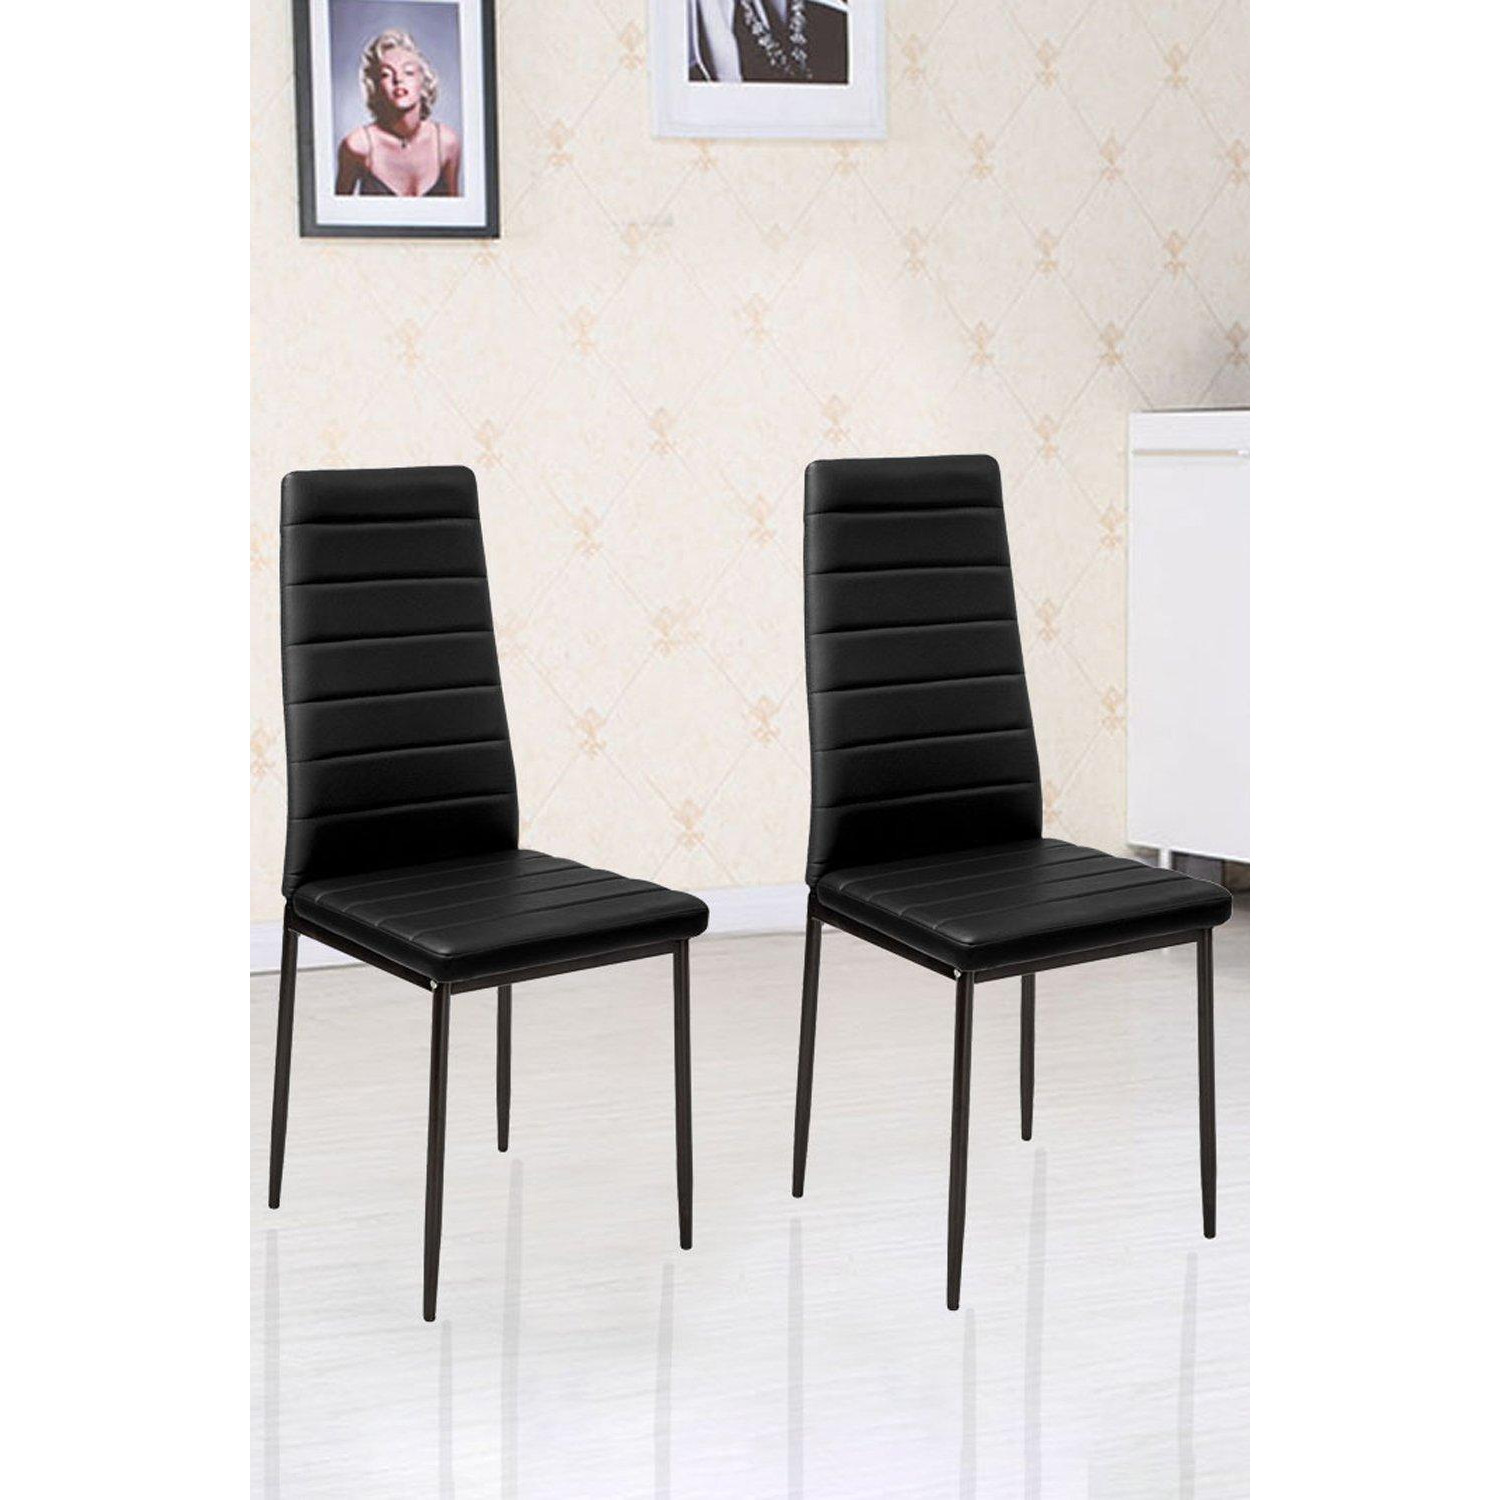 2pcs Armless Leather High Back Dining Chairs Padded Seat - image 1